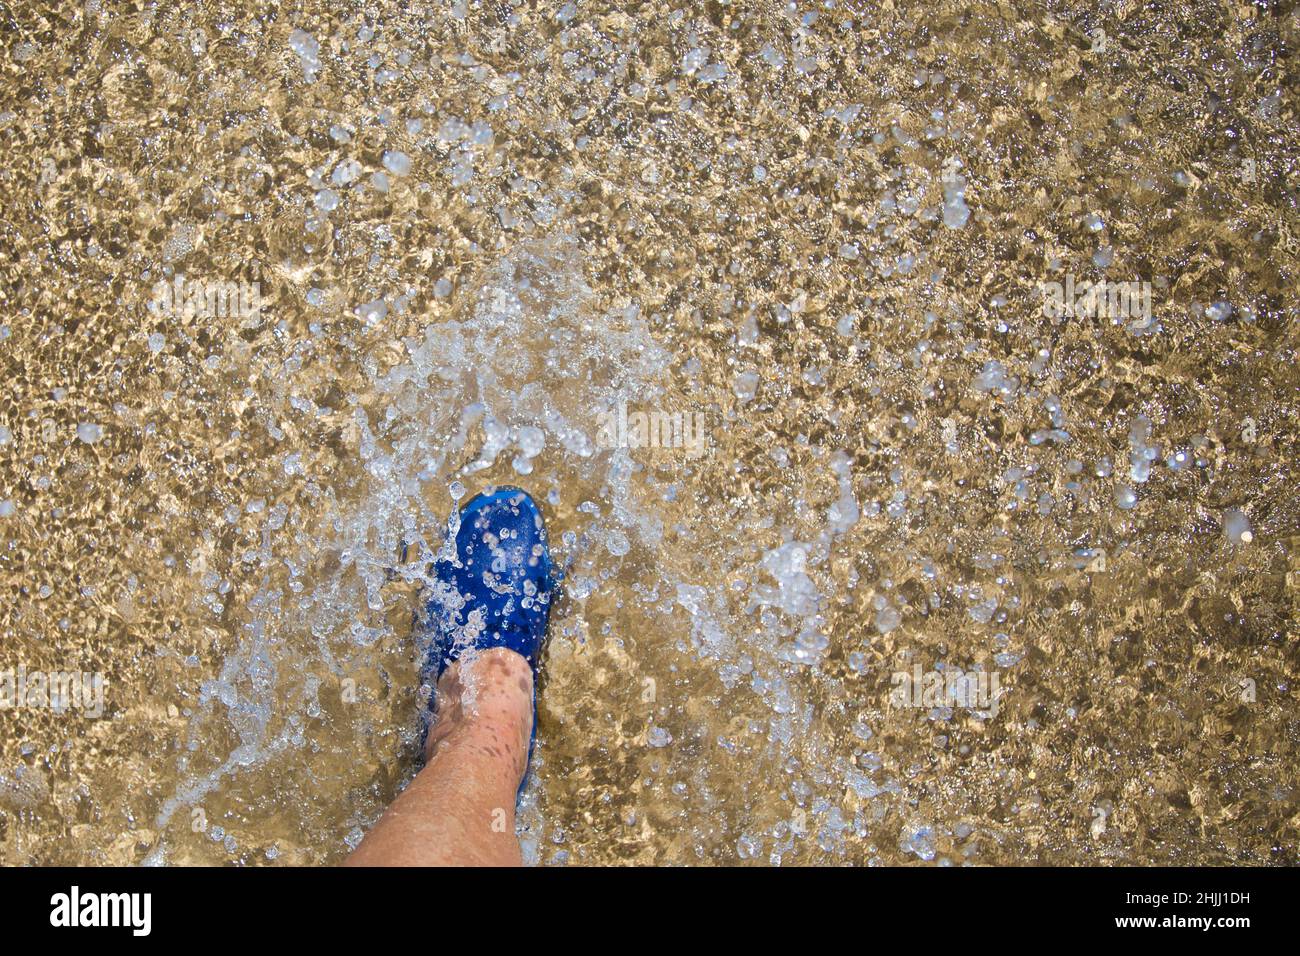 Walking in water on the beach. Stock Photo